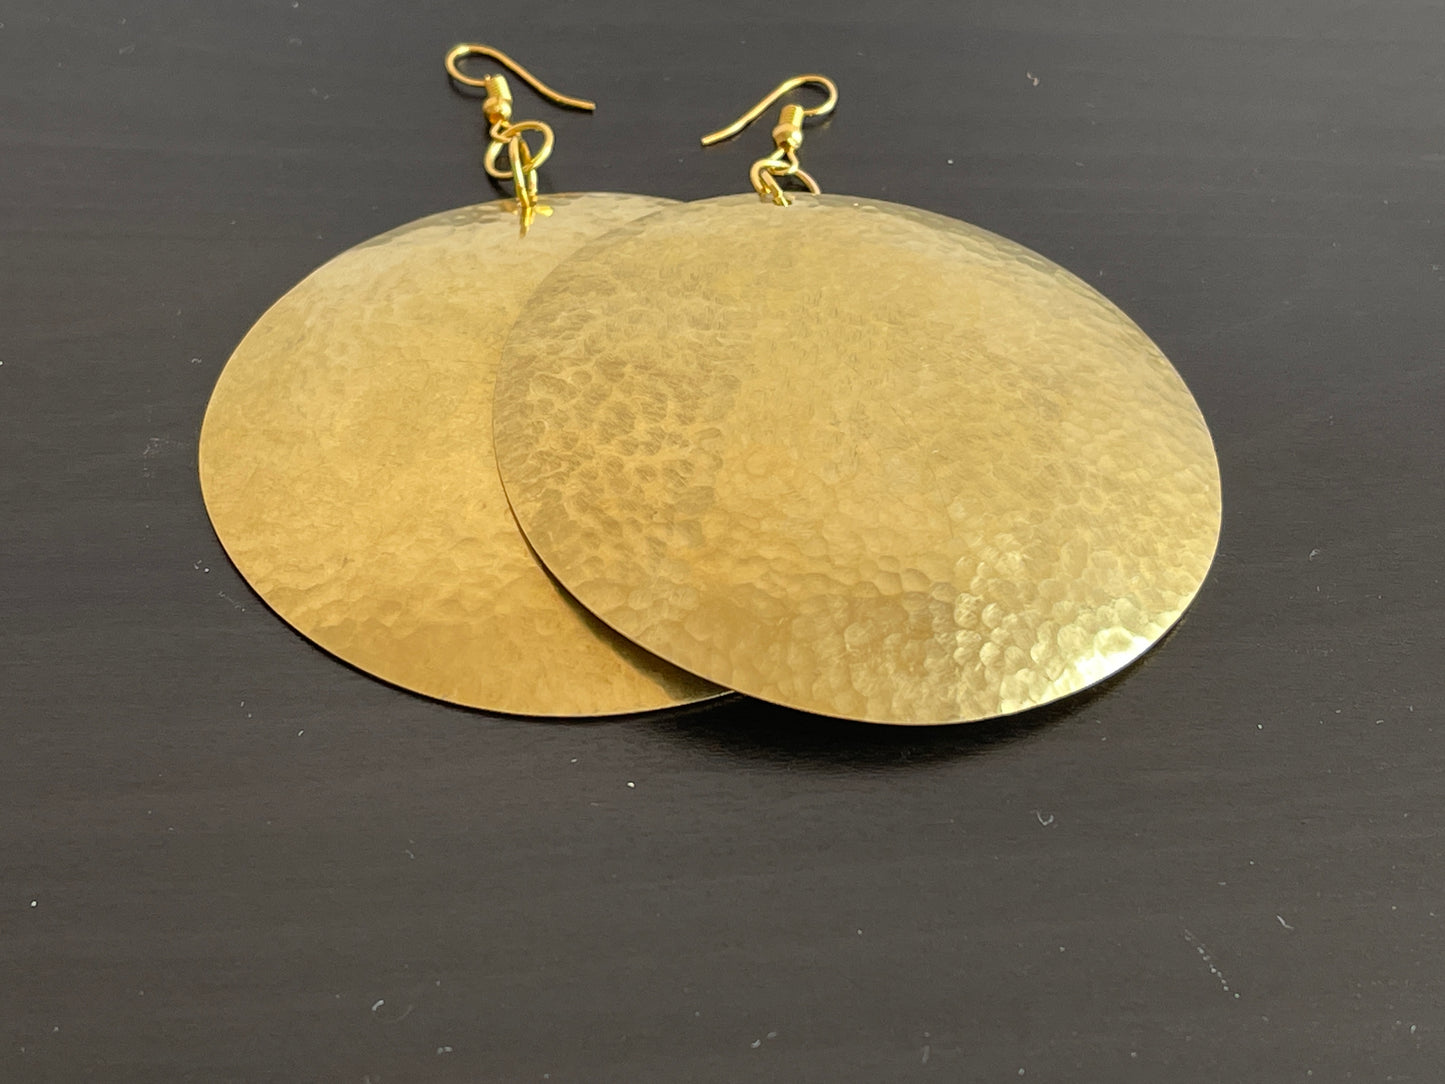 Authentic African Ethnic Hammered  Brass Dangle Earrings